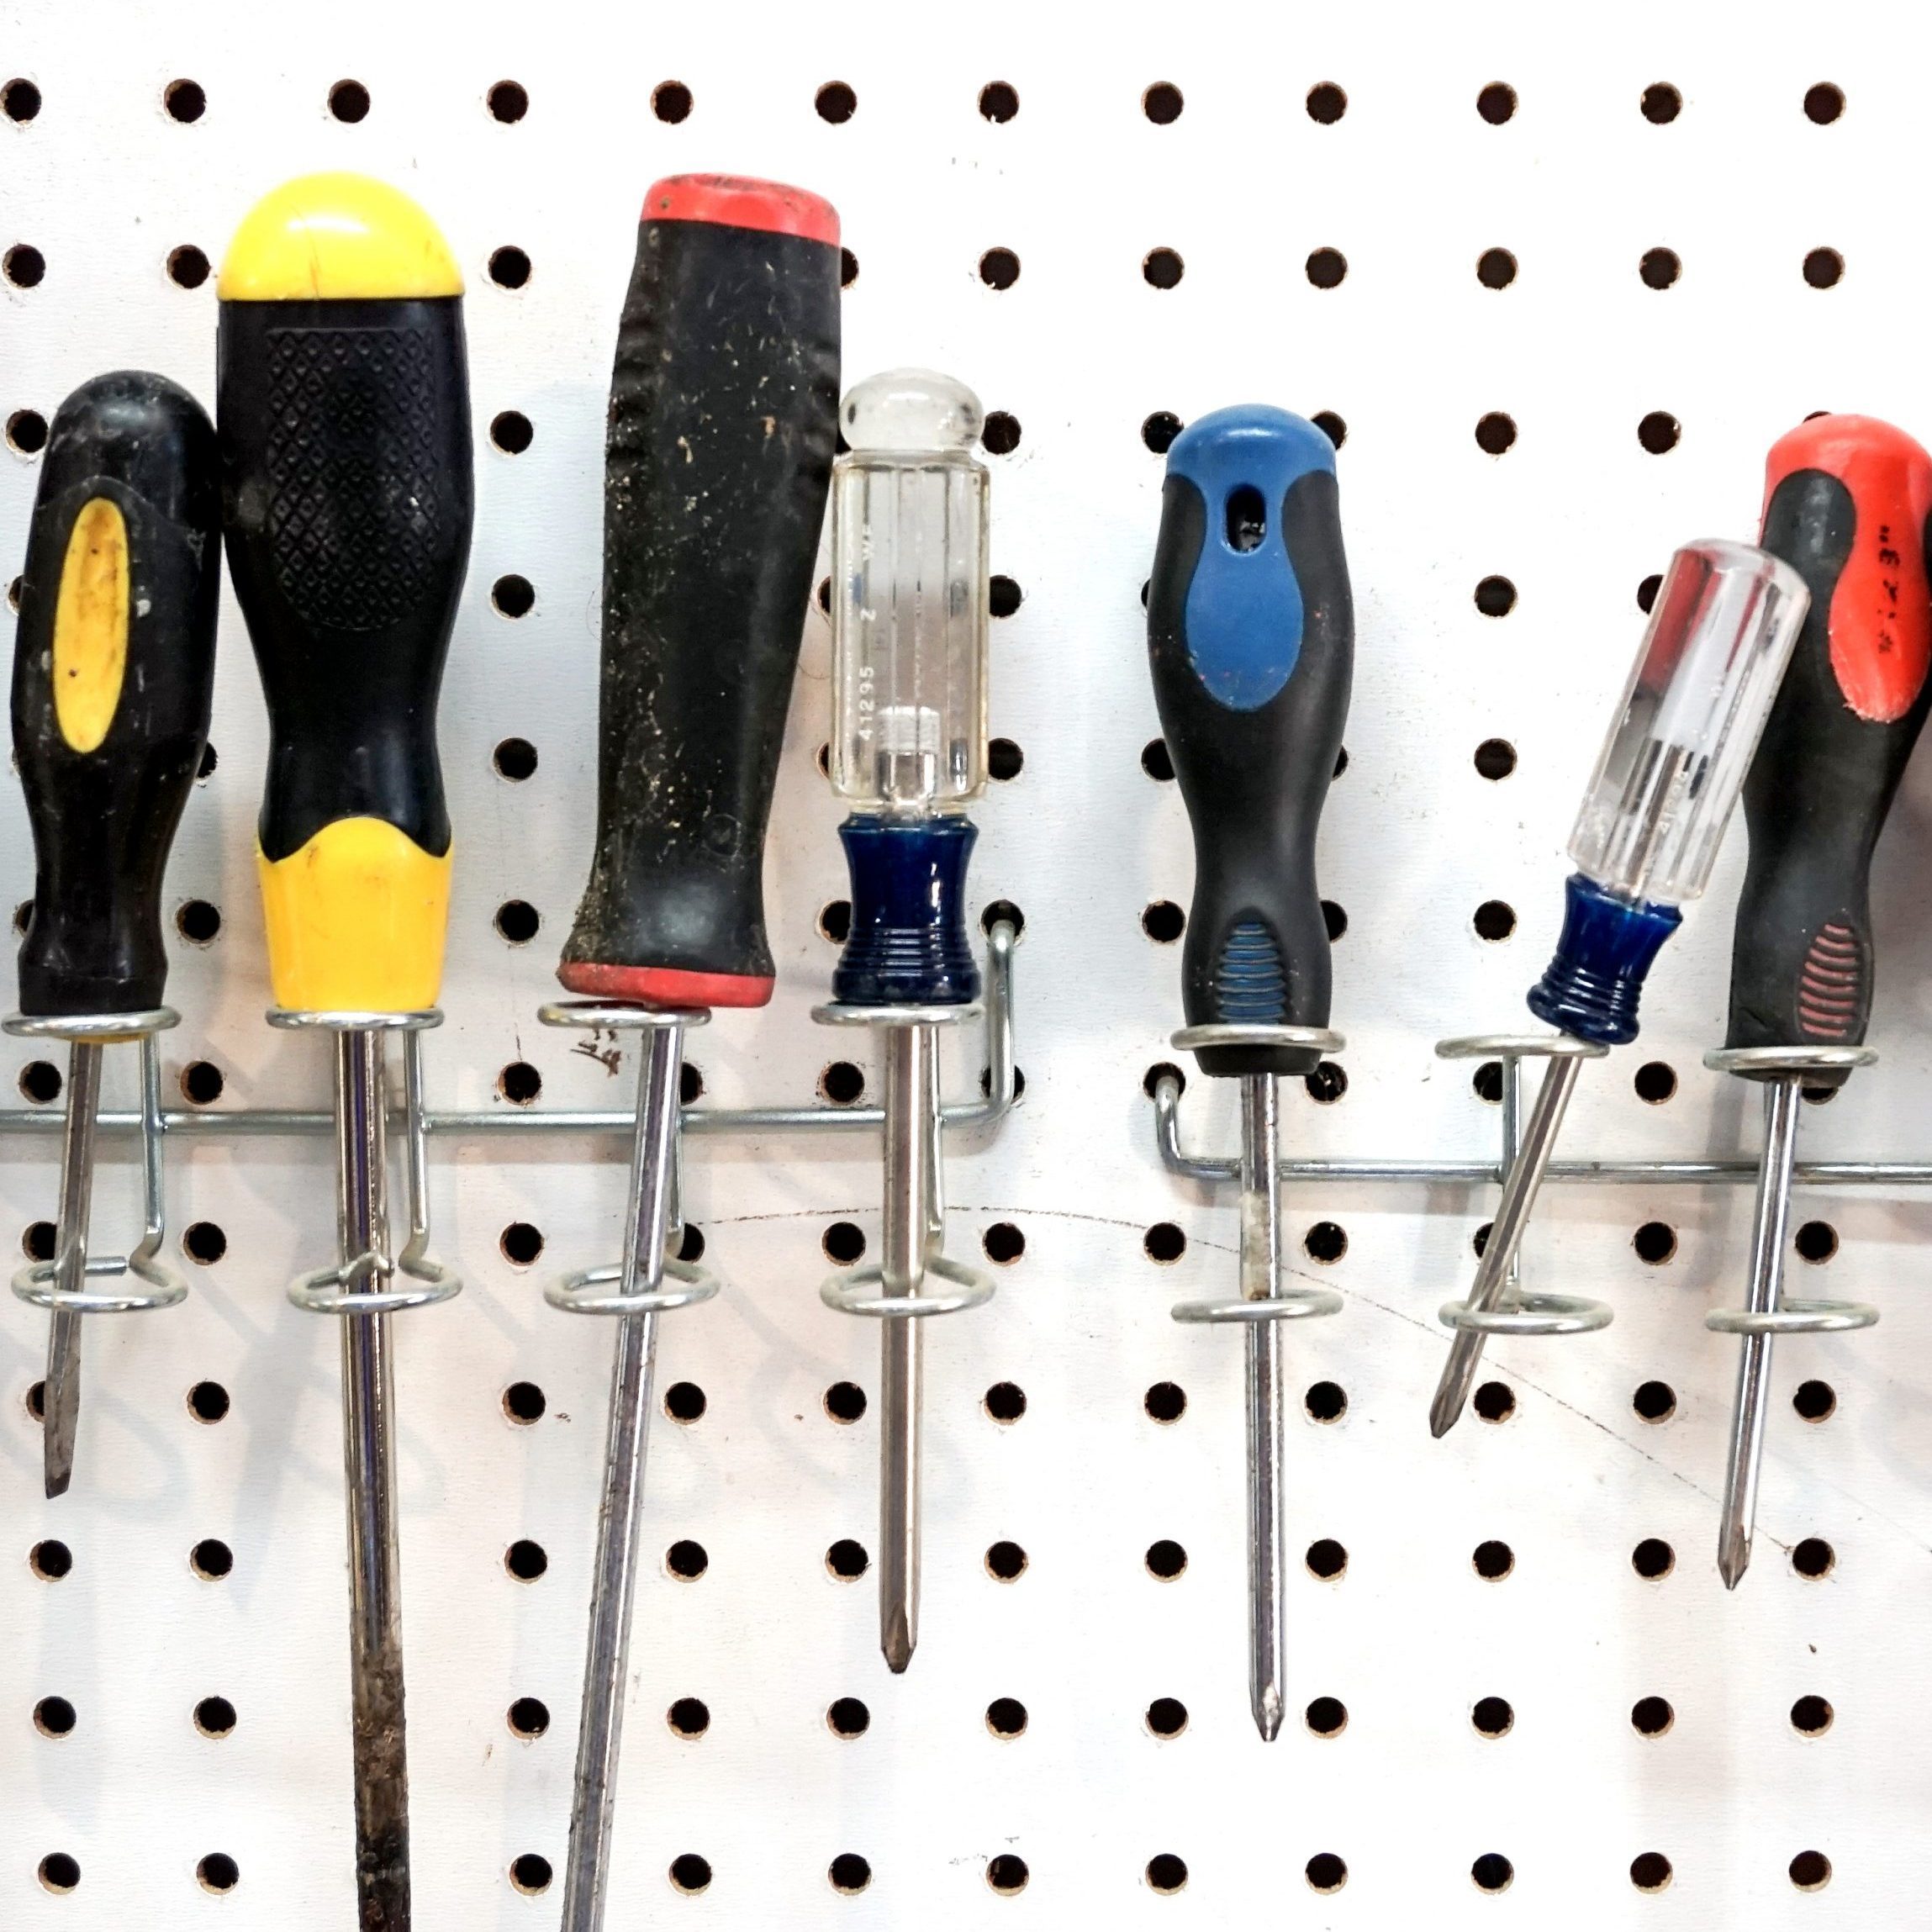 Make this TINY TOOL BOX for storing your Teeny Tiny SCREWDRIVERS, DIY 